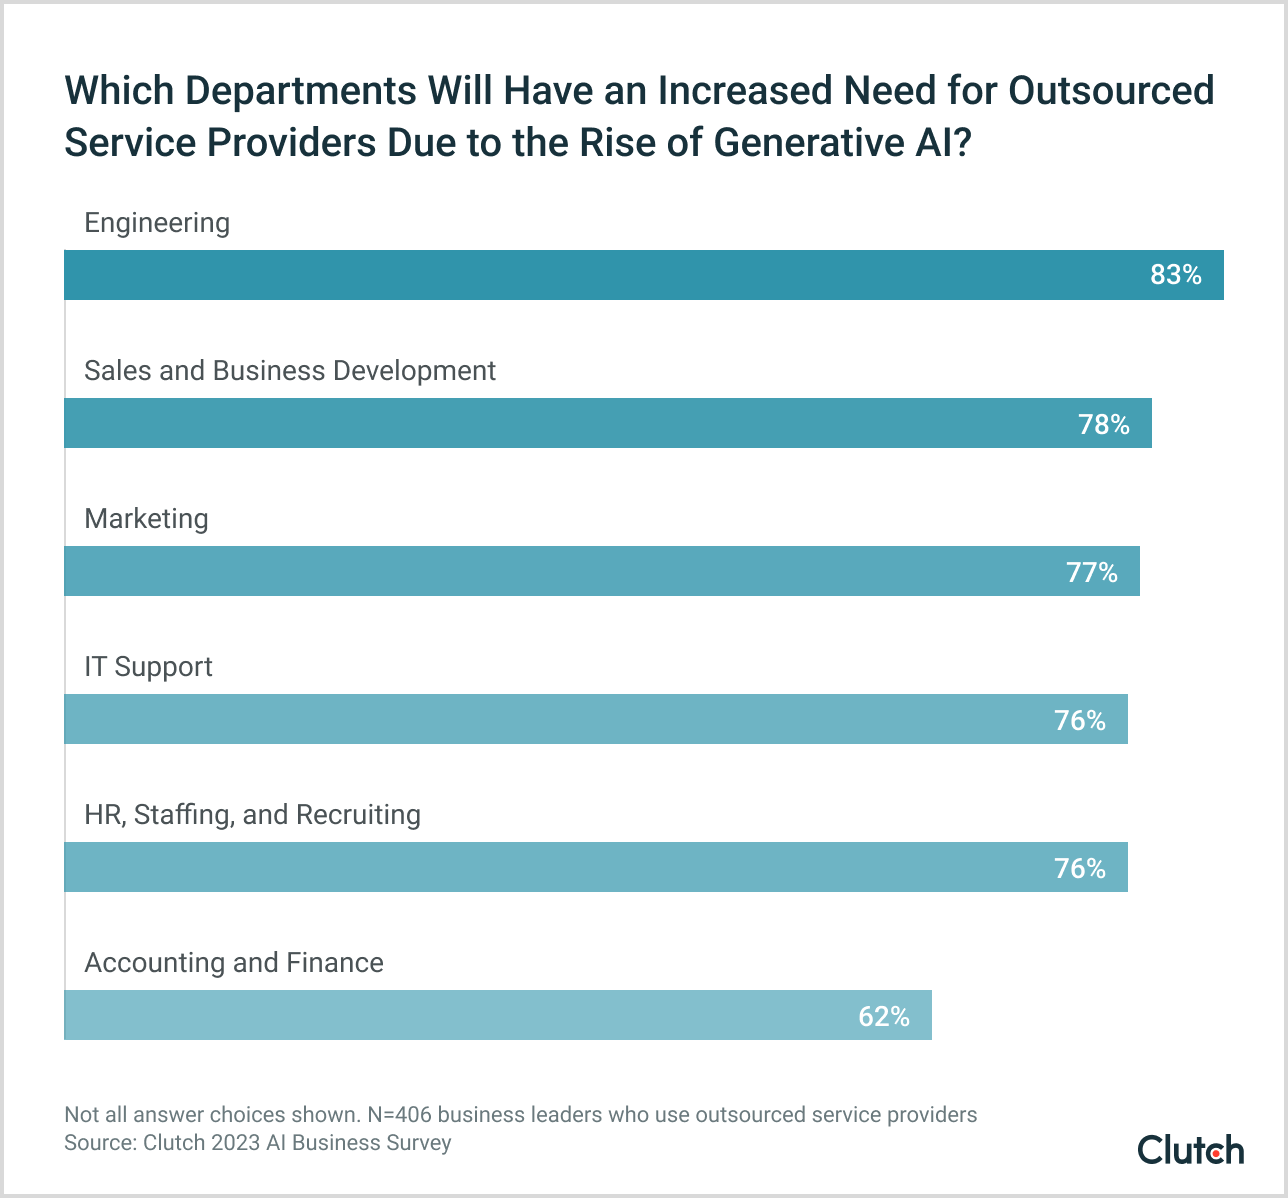 Which departments will have an increased need for outsourced services as a result of generative AI